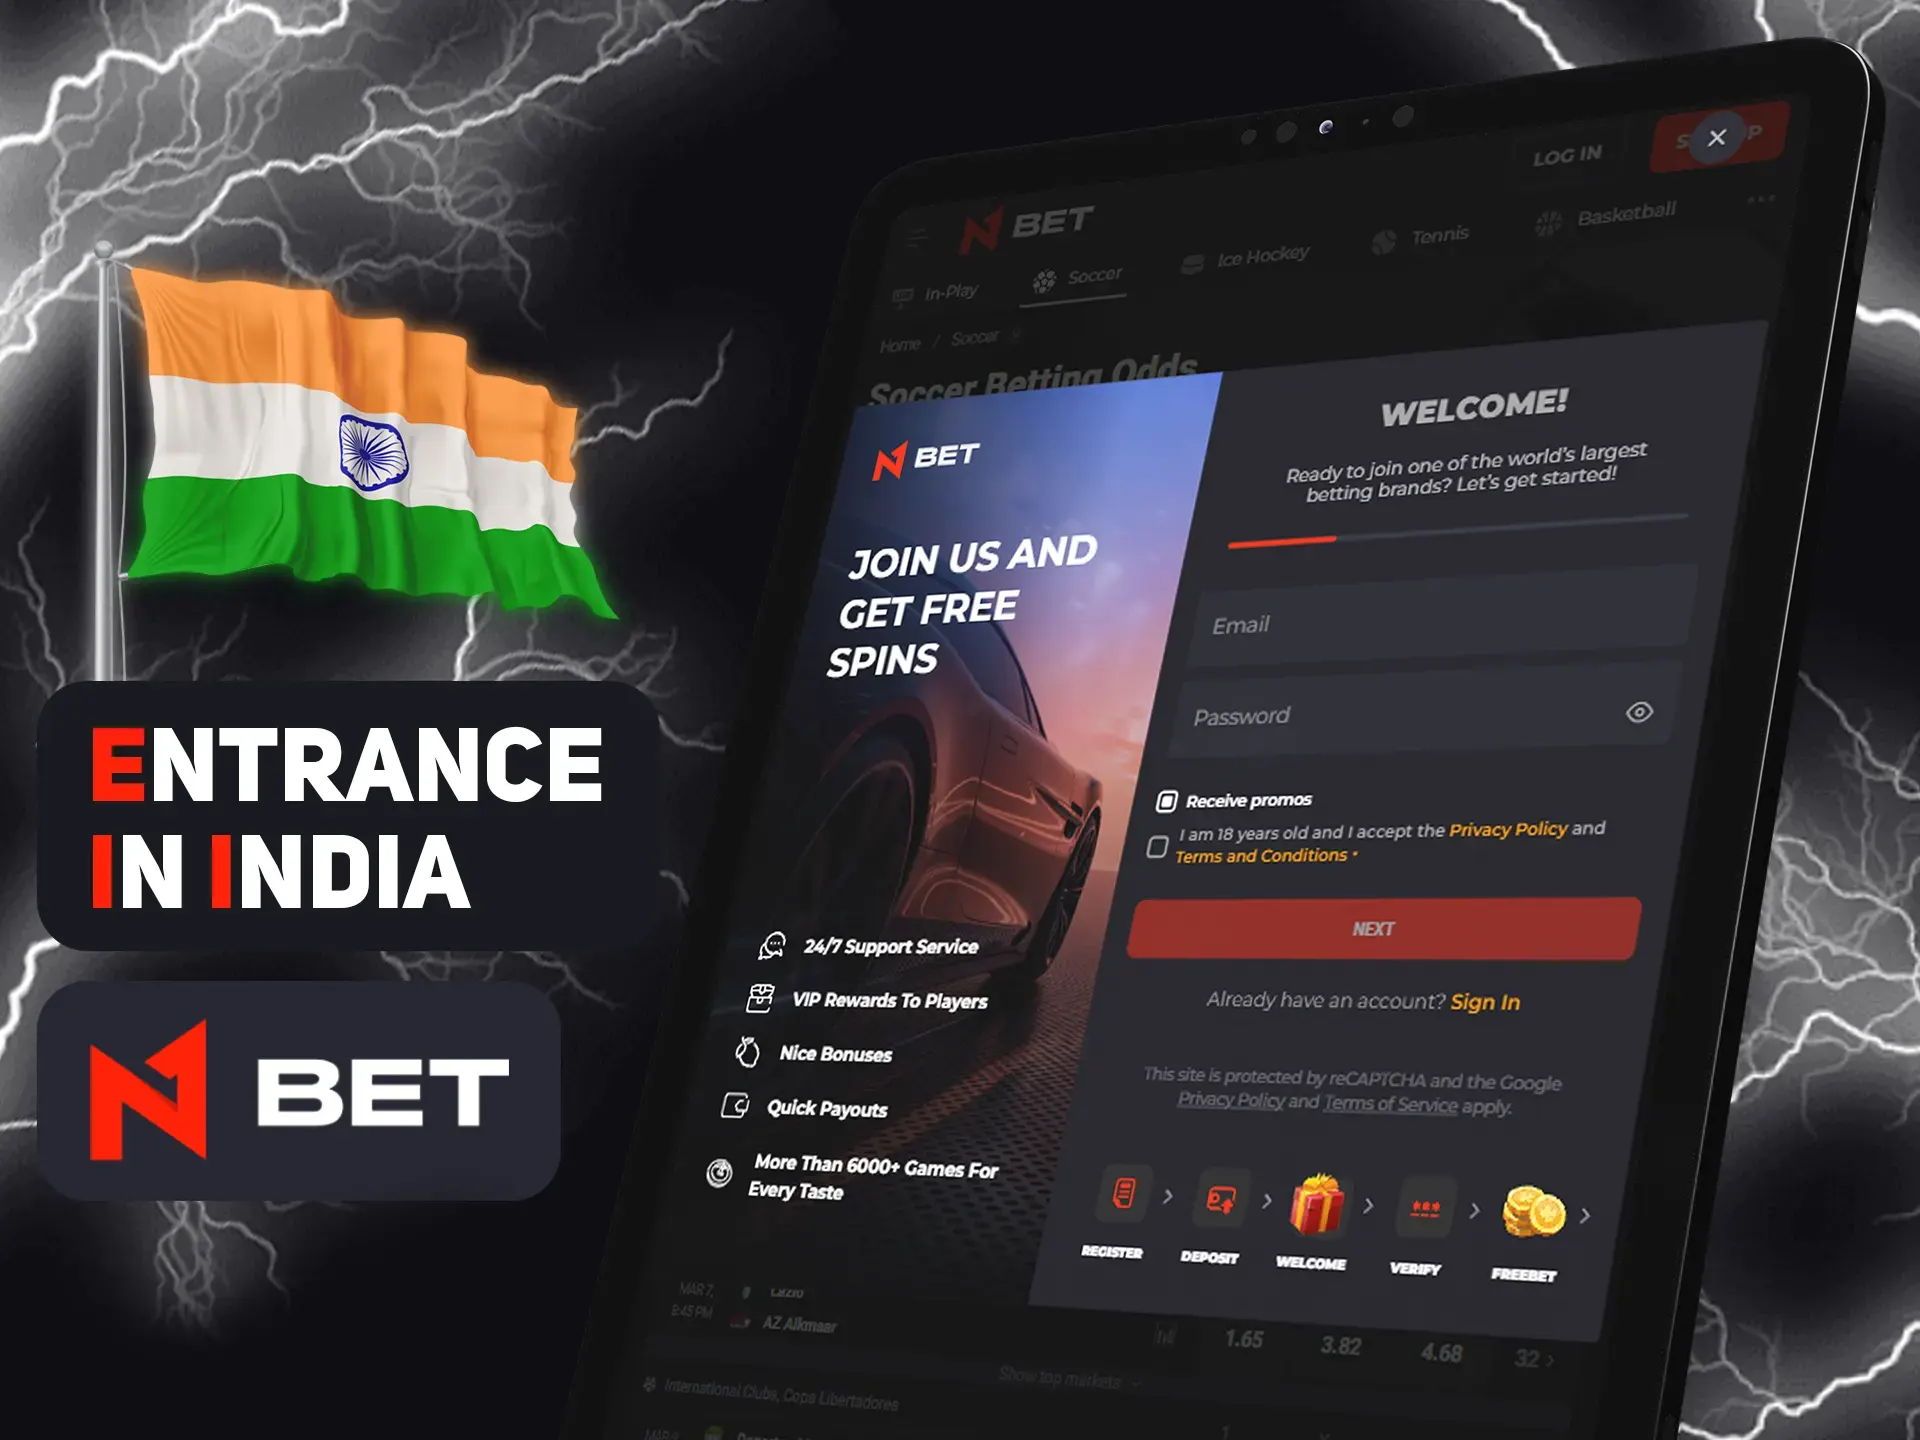 Register your Indian account at N1bet.